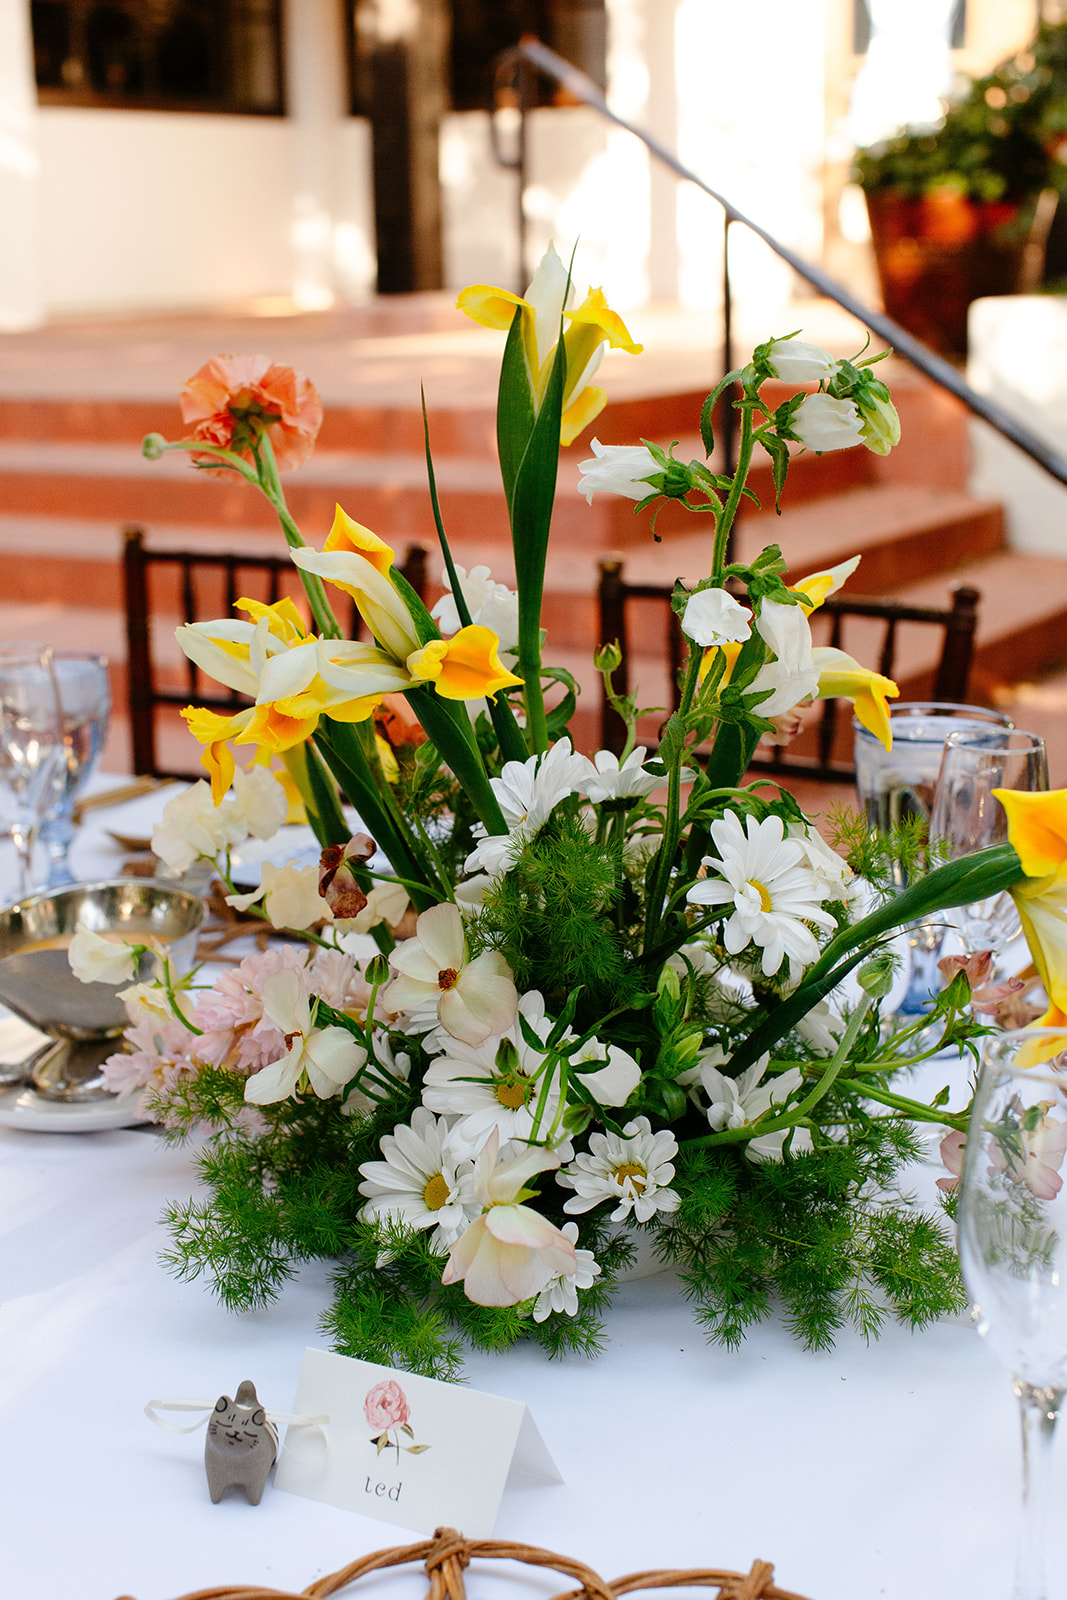 A floral centerpiece with yellow and white flowers is placed on a table set for a meal, featuring wine glasses, silverware, and a name card. Stairs and potted plants are in the background at a garden party wedding